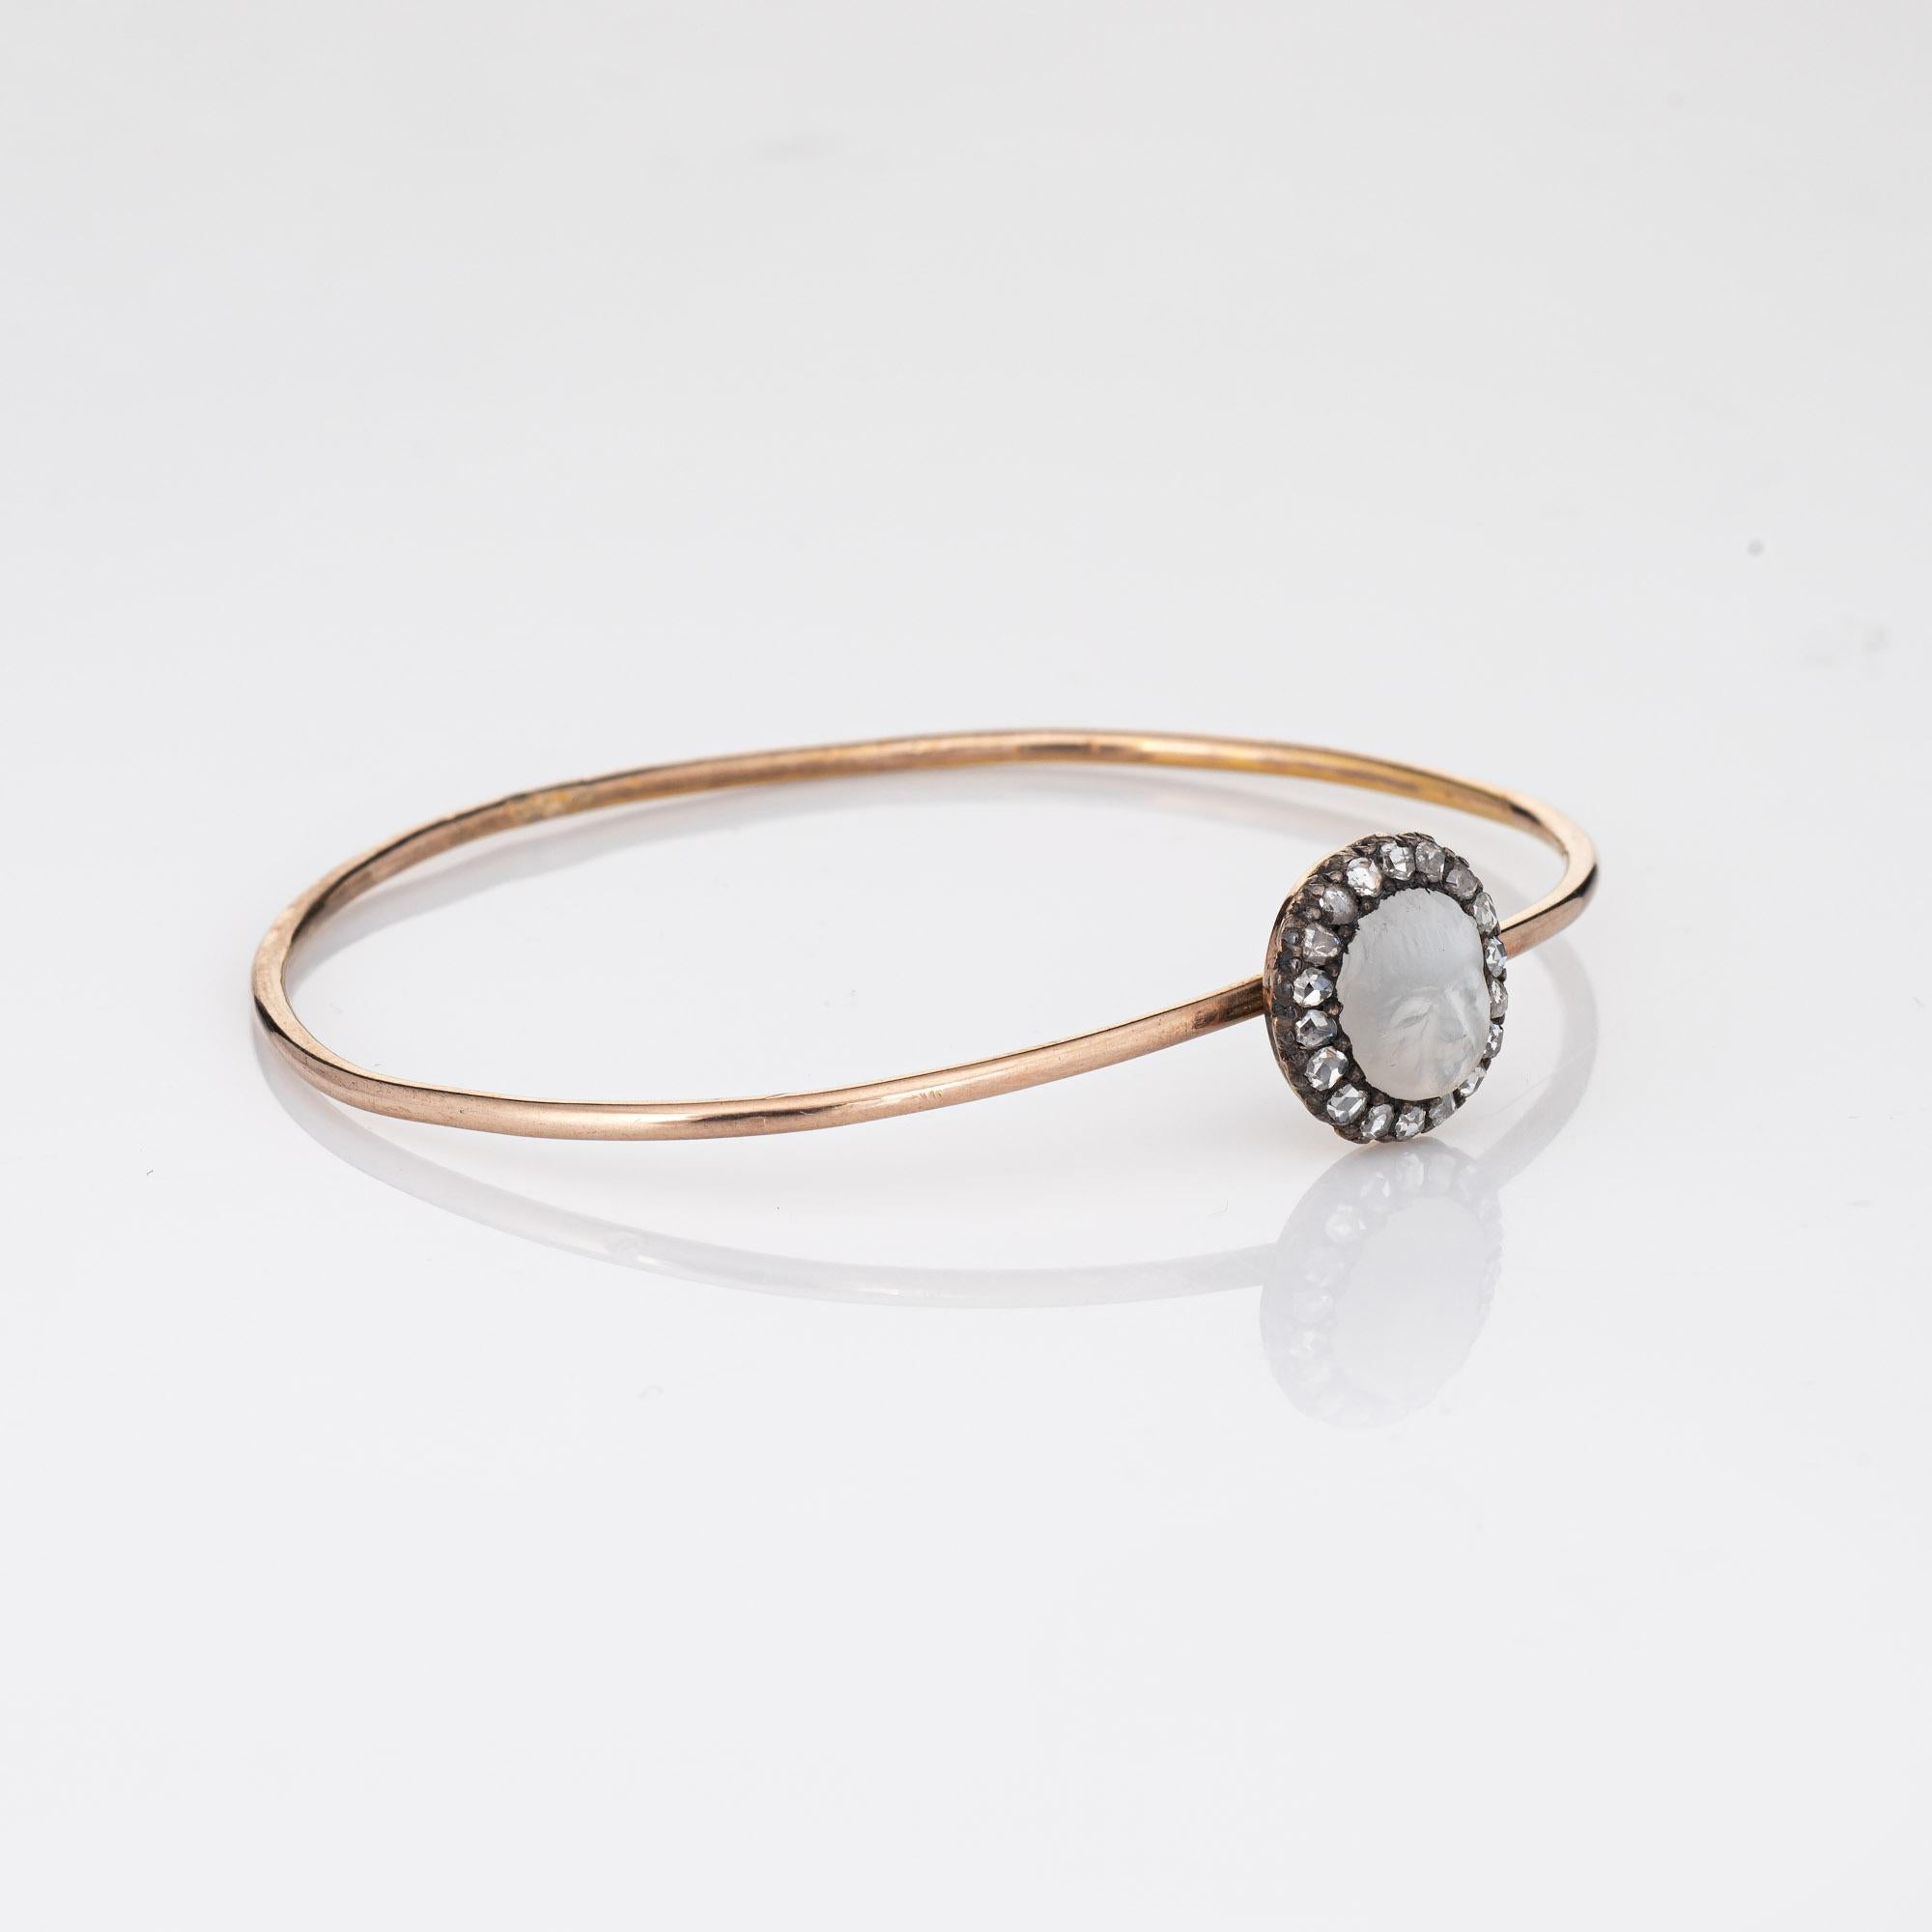 Distinct antique Victorian moonstone & diamond bangle bracelet (circa 1880s to 1900s) crafted in 9k yellow gold. 

Carved moonstone measures 8.5mm x 7mm, accented with 18 estimated 0.03 carat old rose cut diamonds. The total diamond weight is